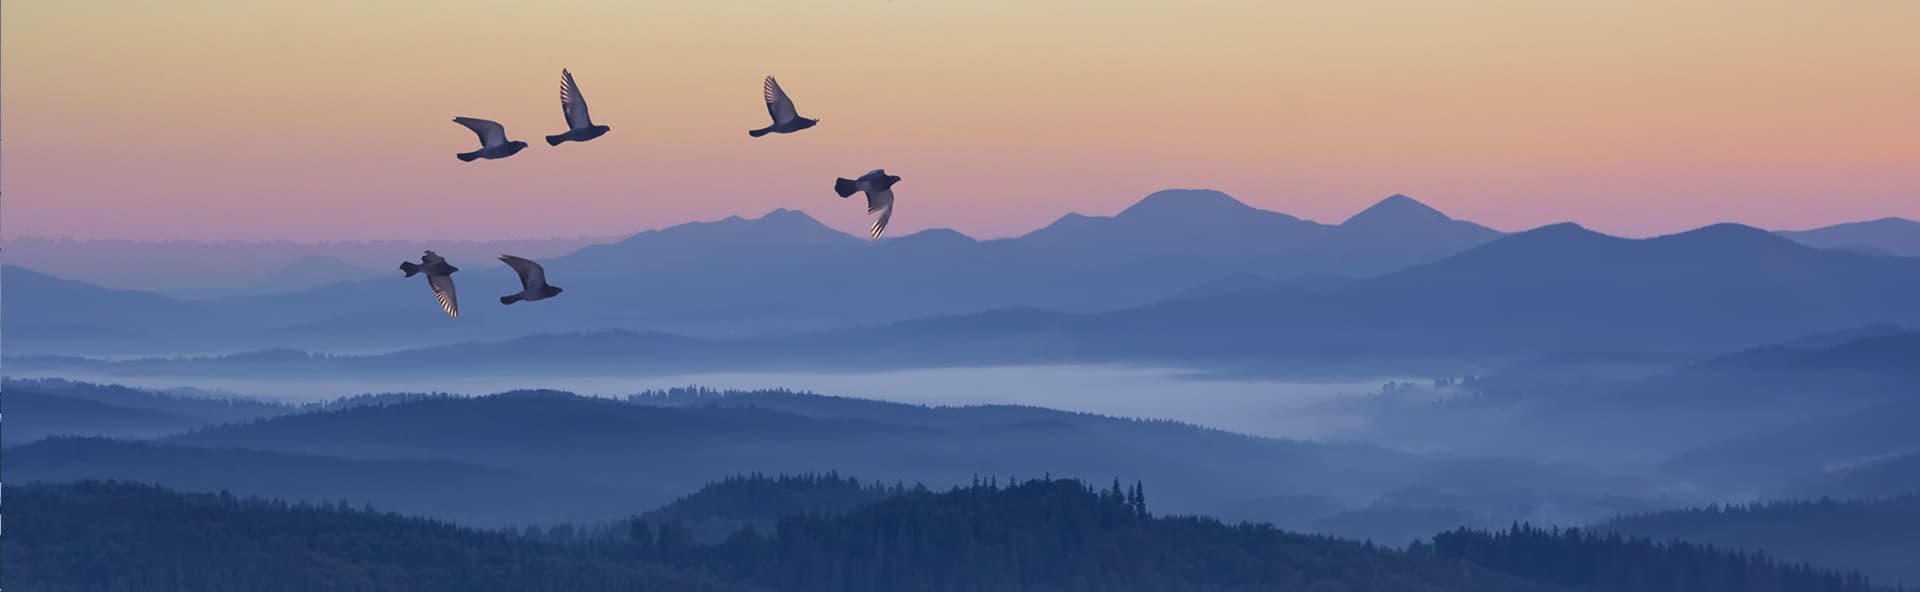 birds flying above mountains